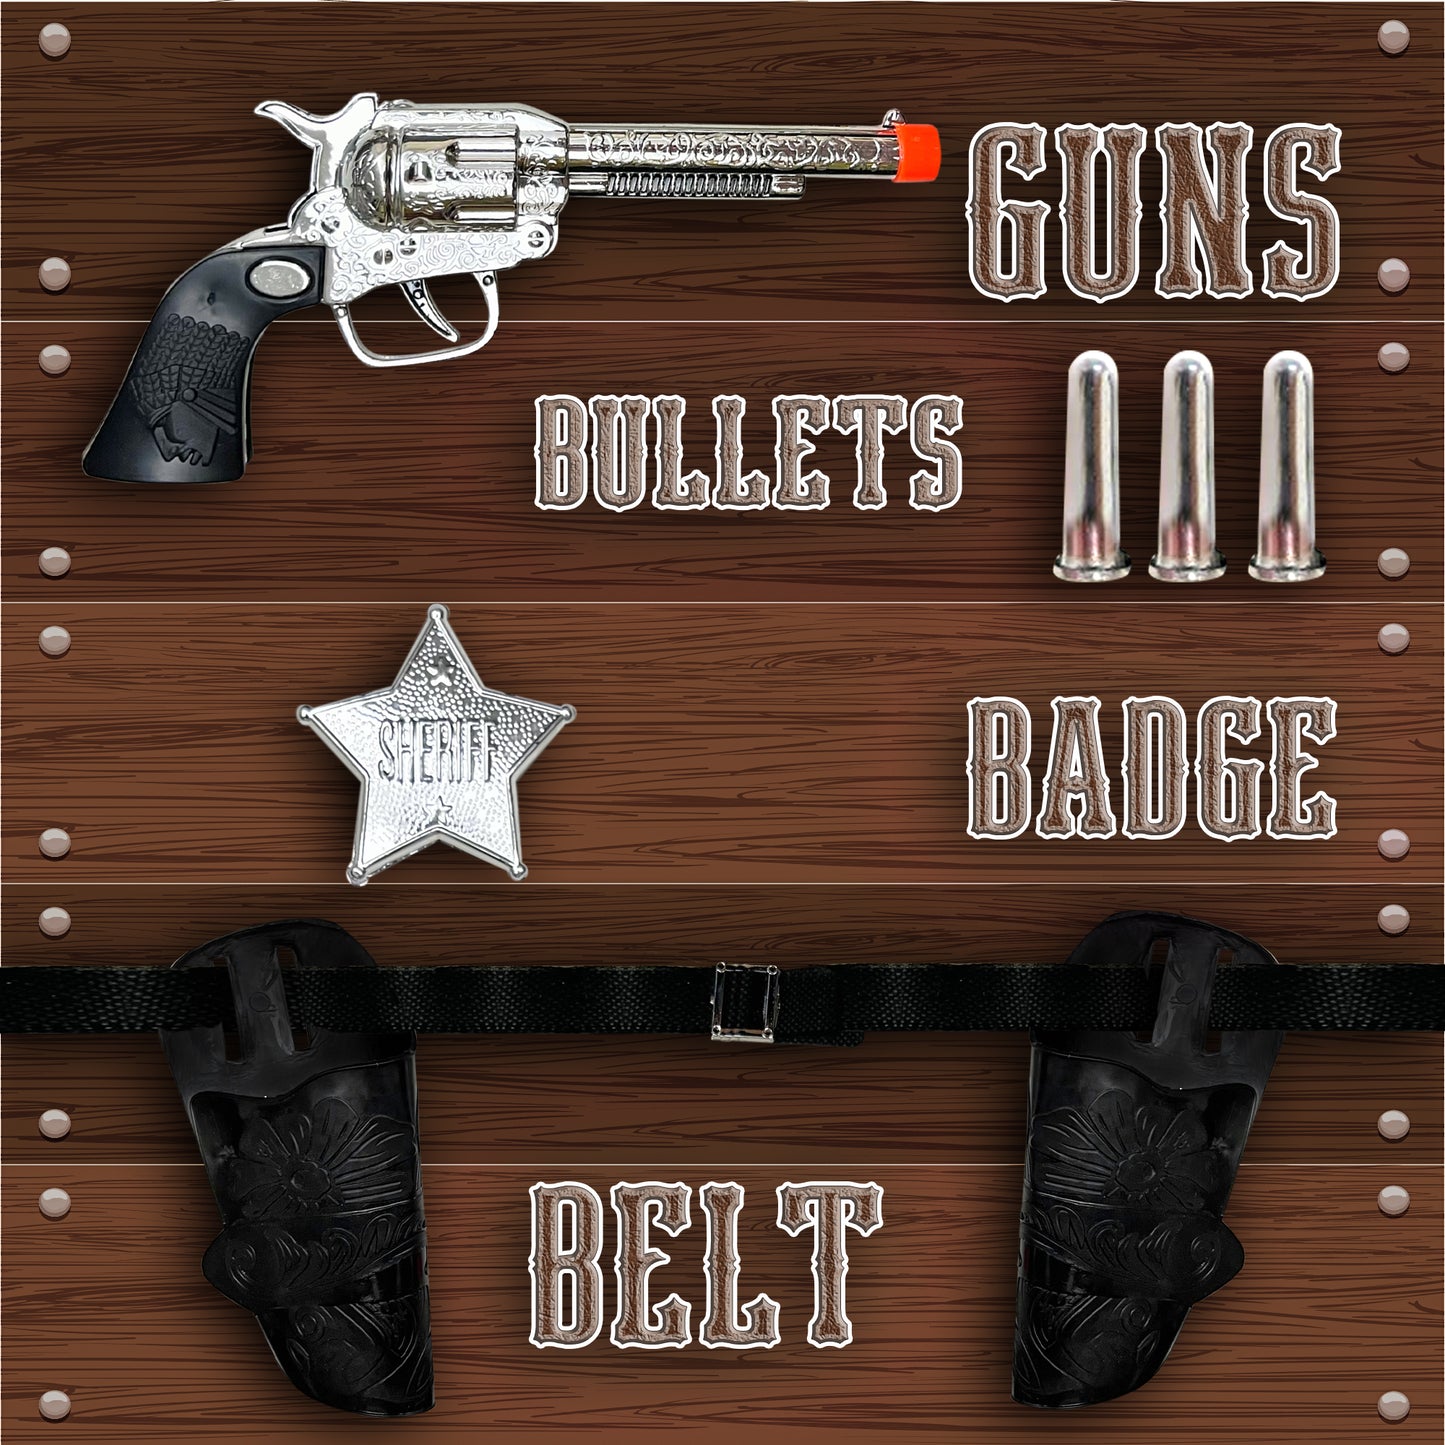 Old Western Action Belt Set for Kids with 2 Toy Pistols, Sheriff Badge, Gun Holsters, and 3 Play Bullets